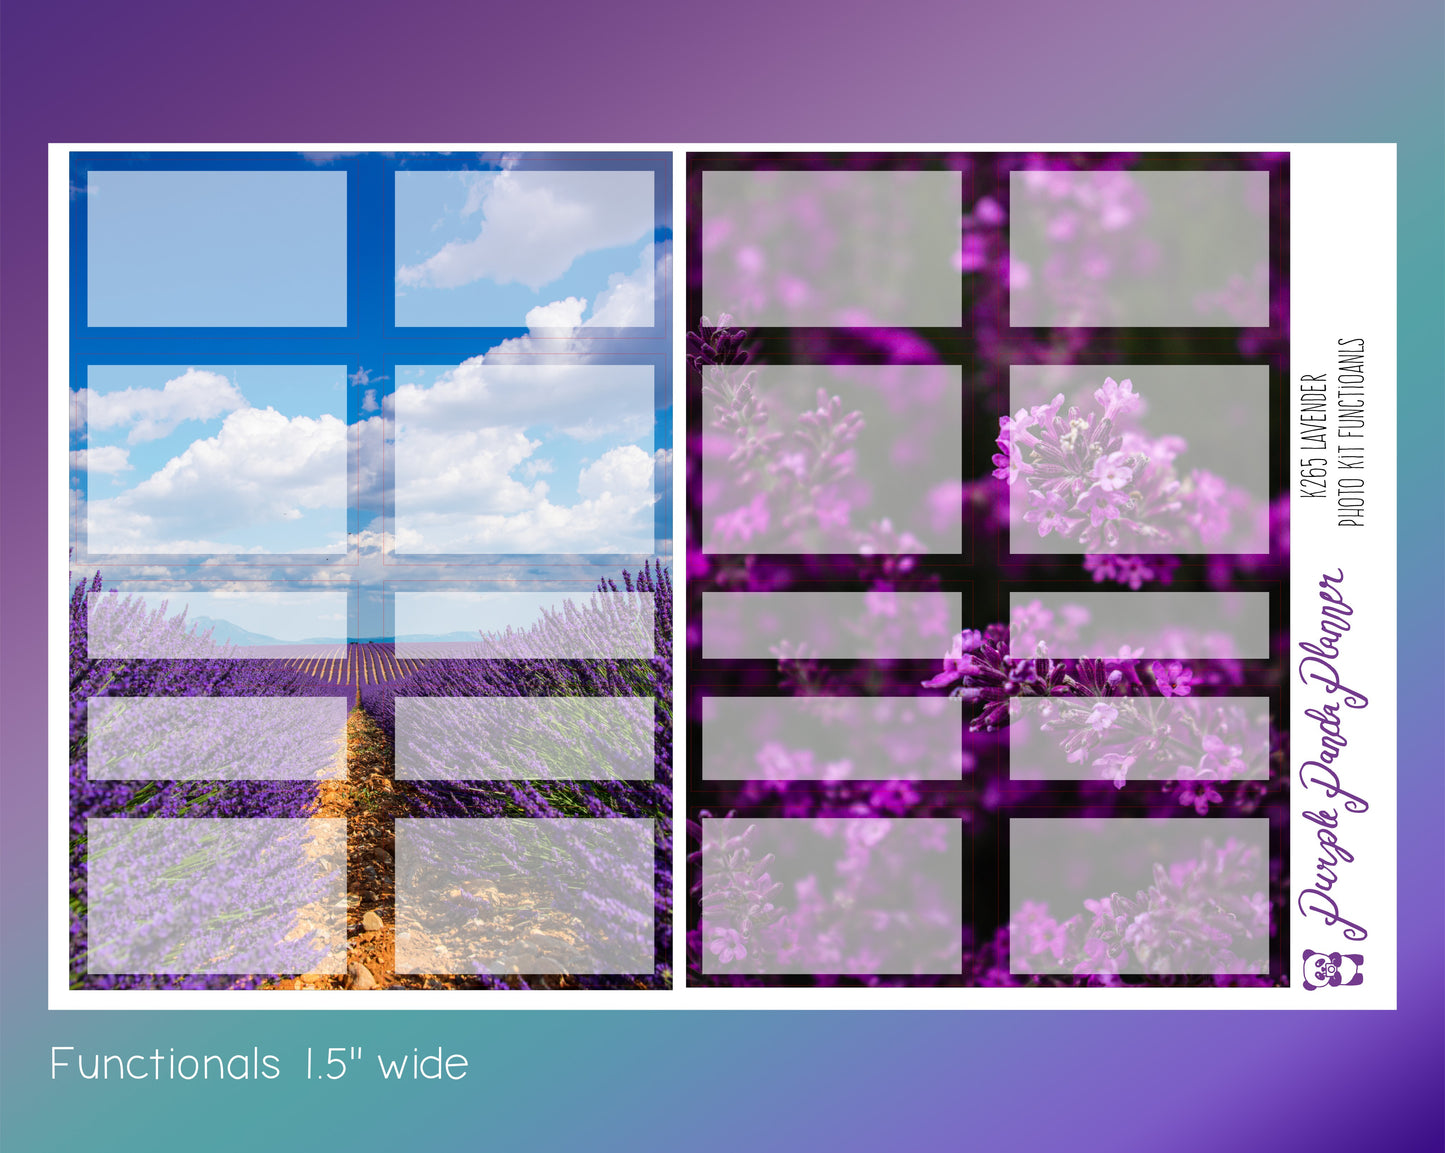 Vertical Weekly Photo Kit | Lavender | Stickers for Planner, or Bullet Journal (K262-265)